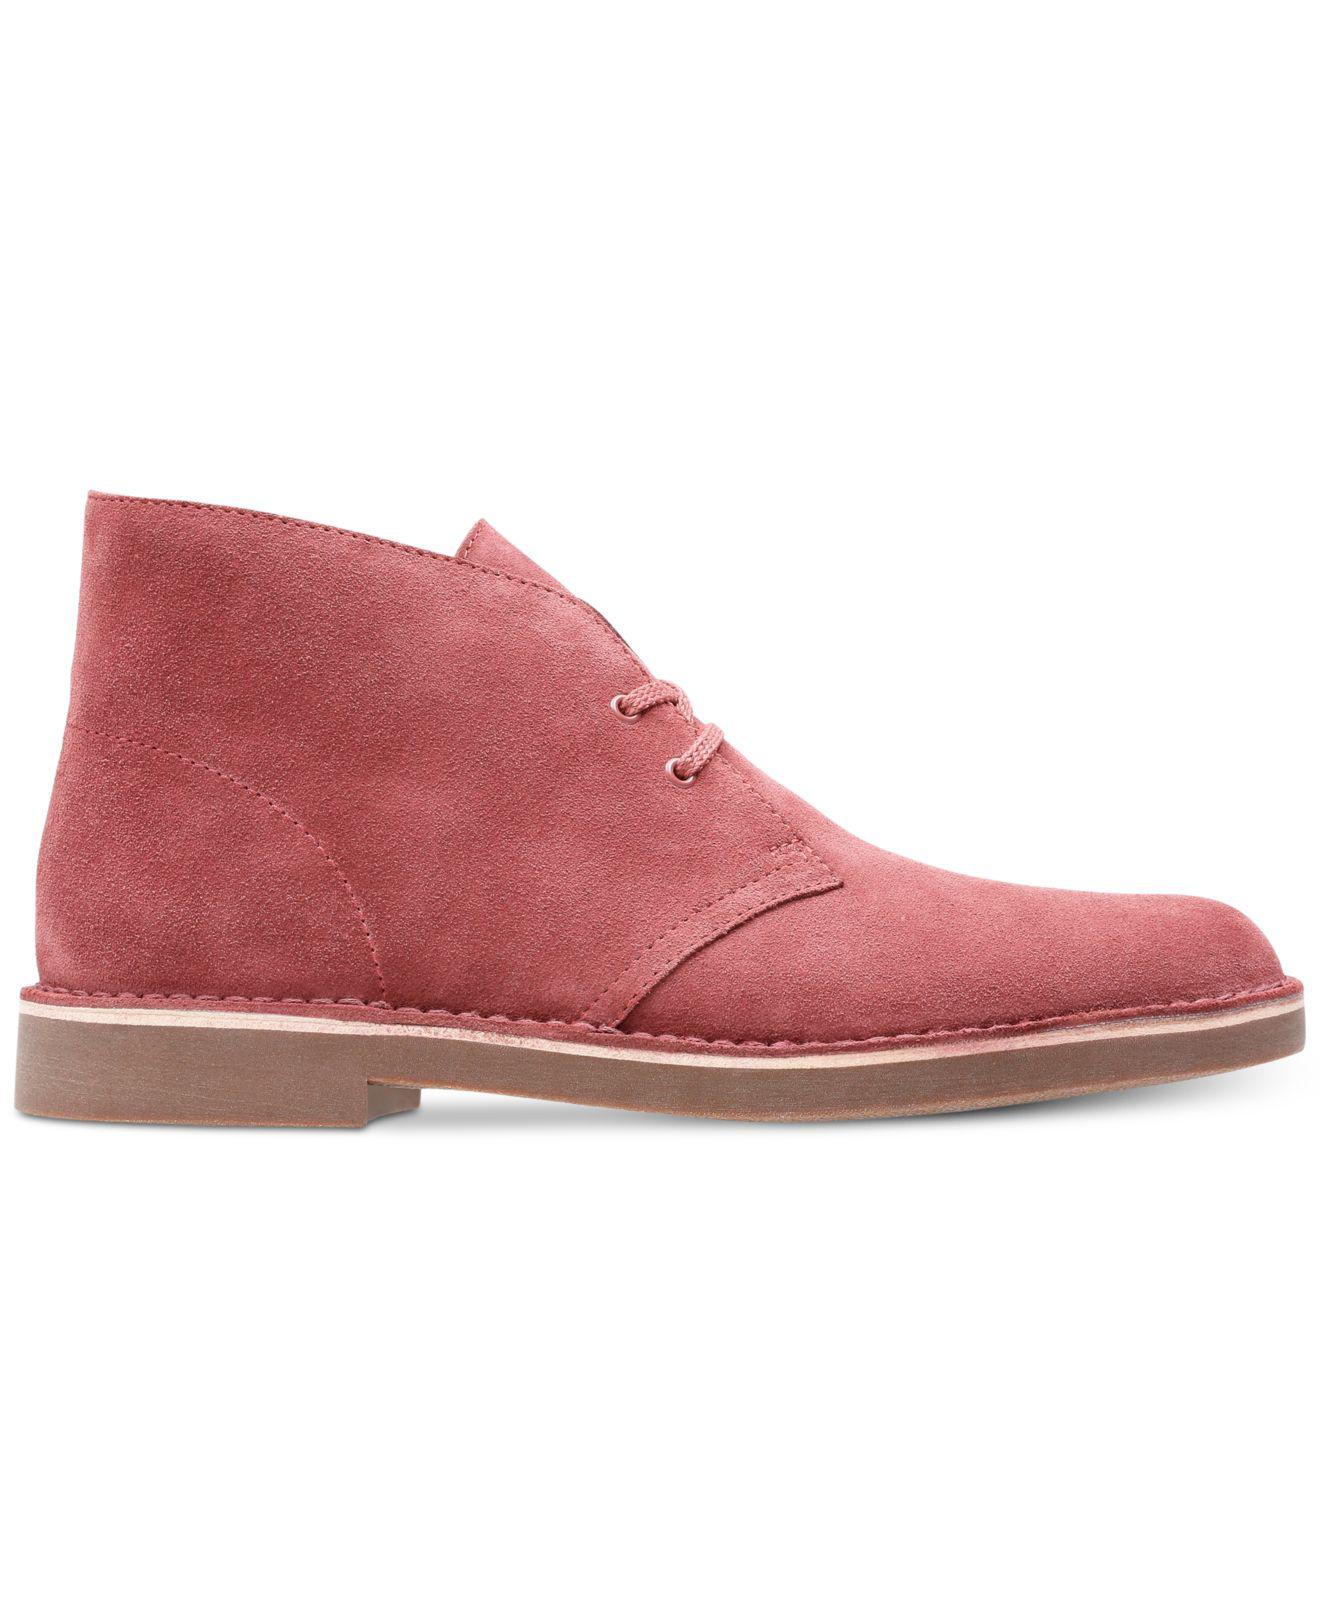 clarks bushacre 2 suede chukka boots